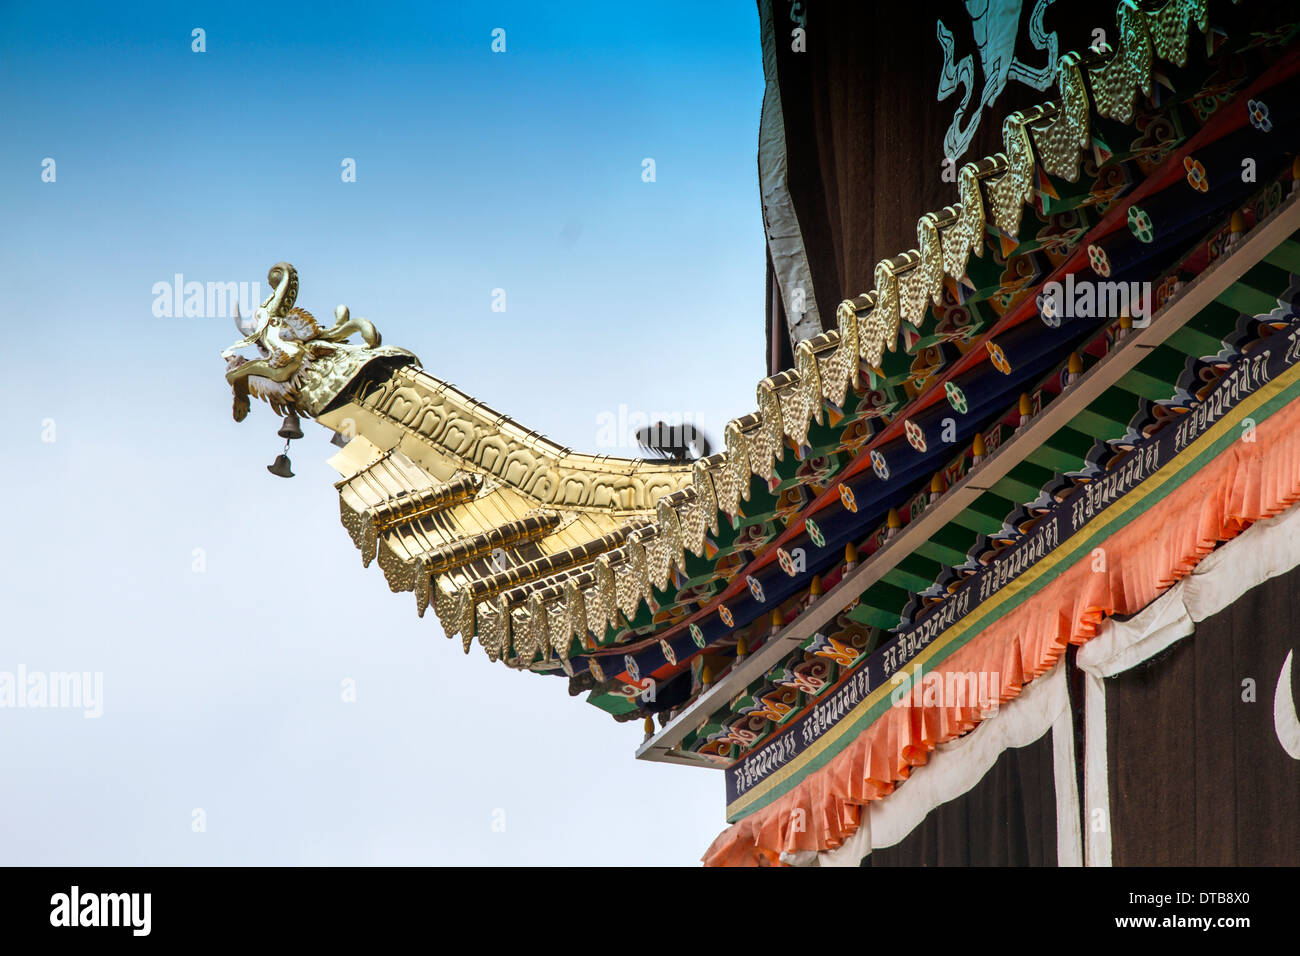 Langmusi temple in sichuan, china Stock Photo